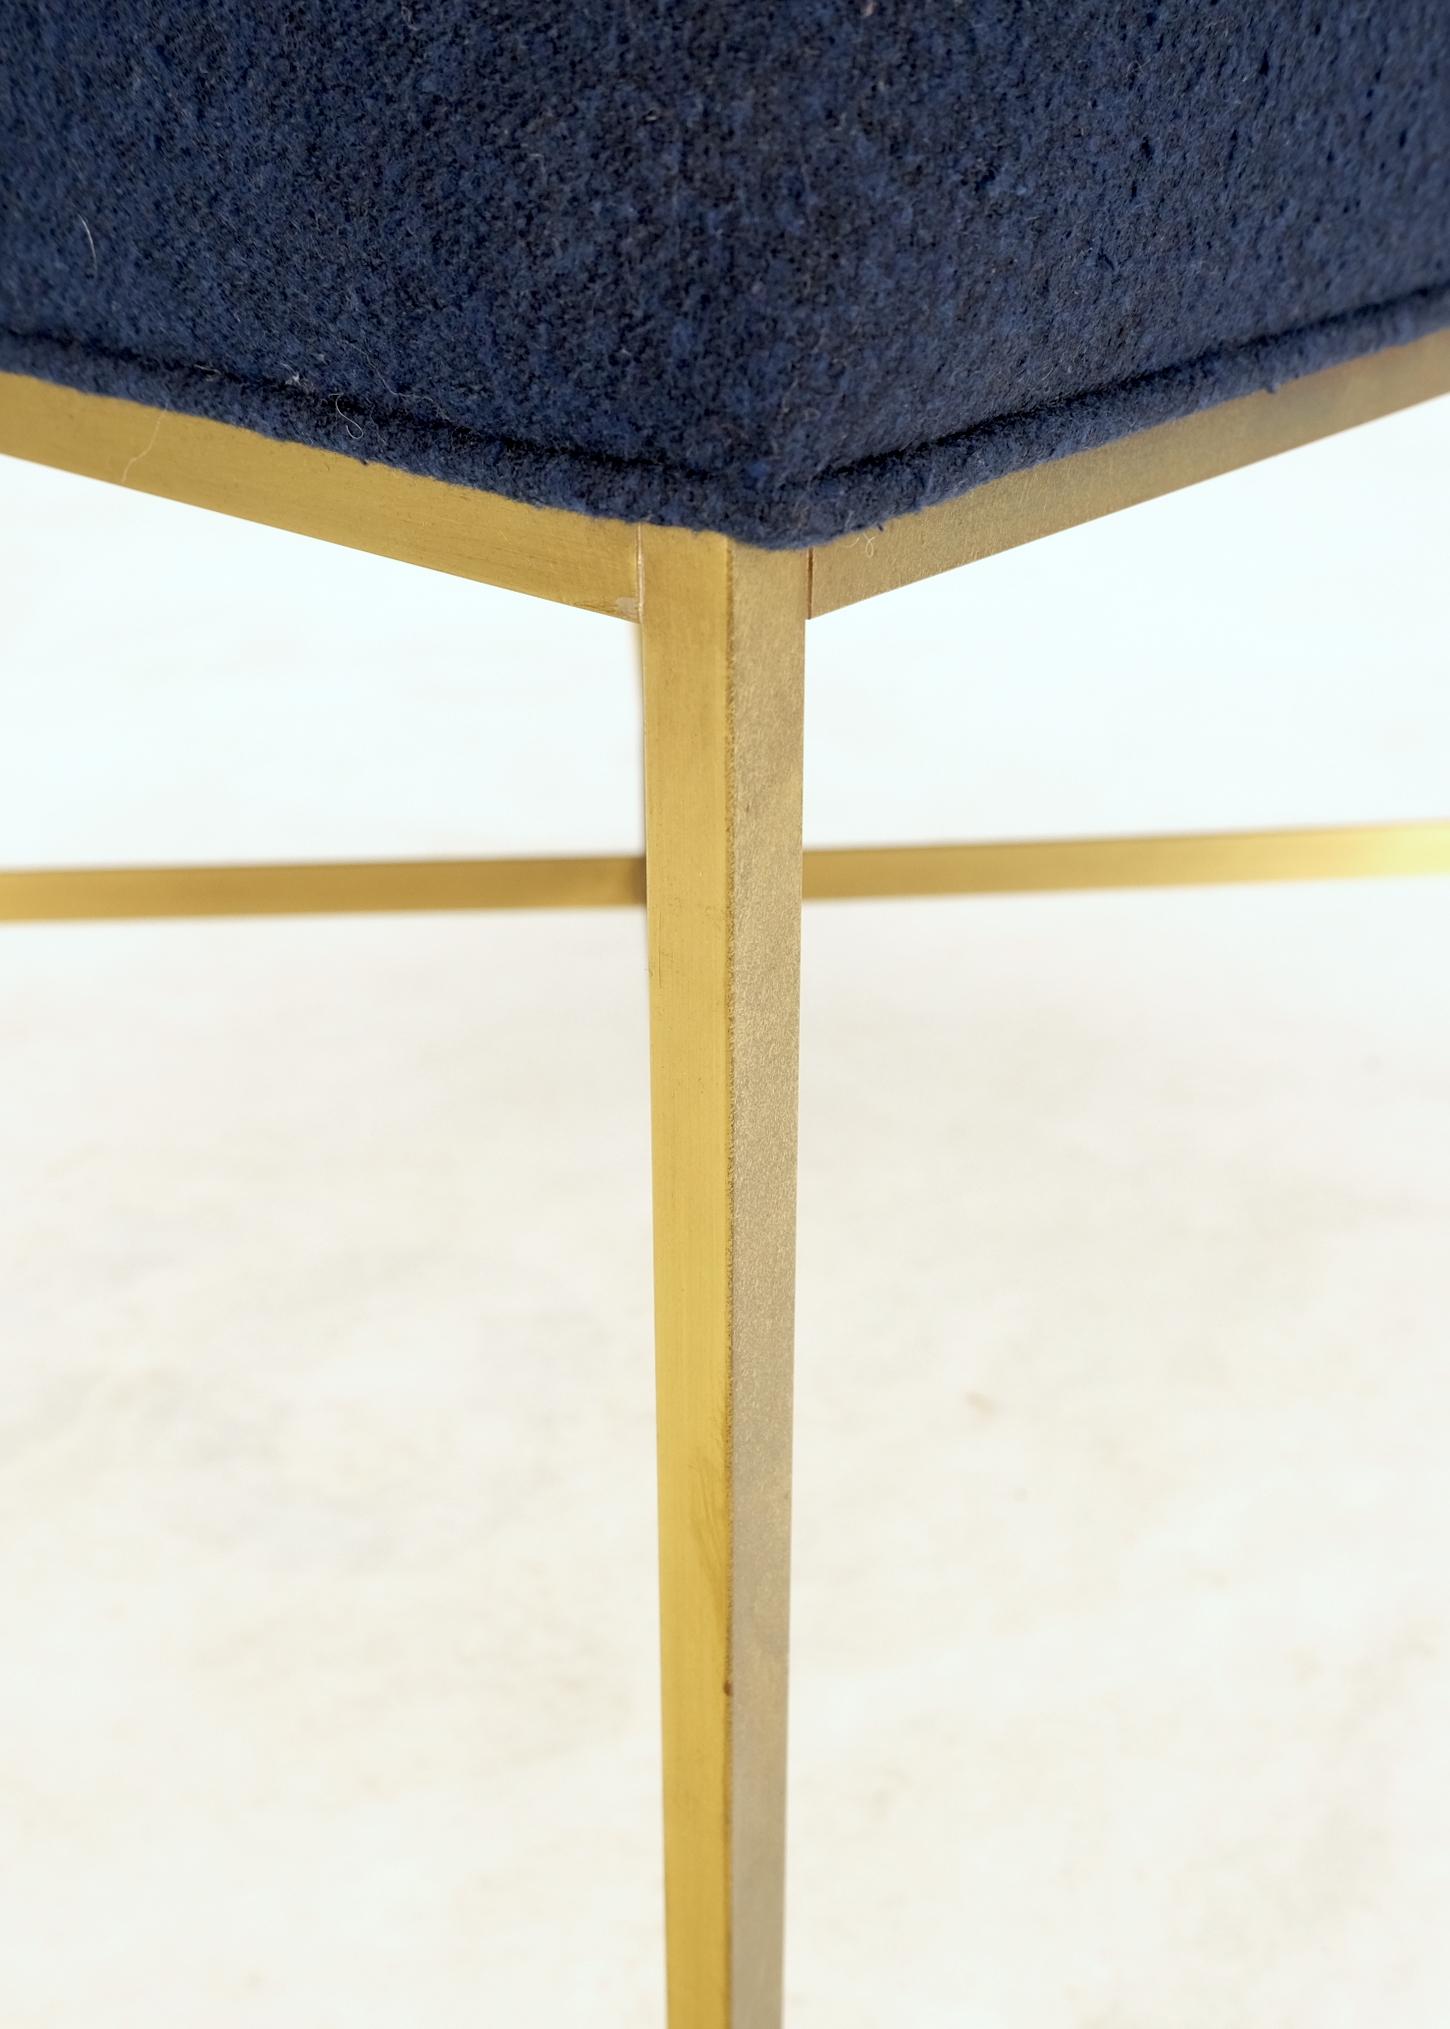 Lacquered McCobb Square Brass Square Base New Navy Blue Upholstery Bench Stool For Sale